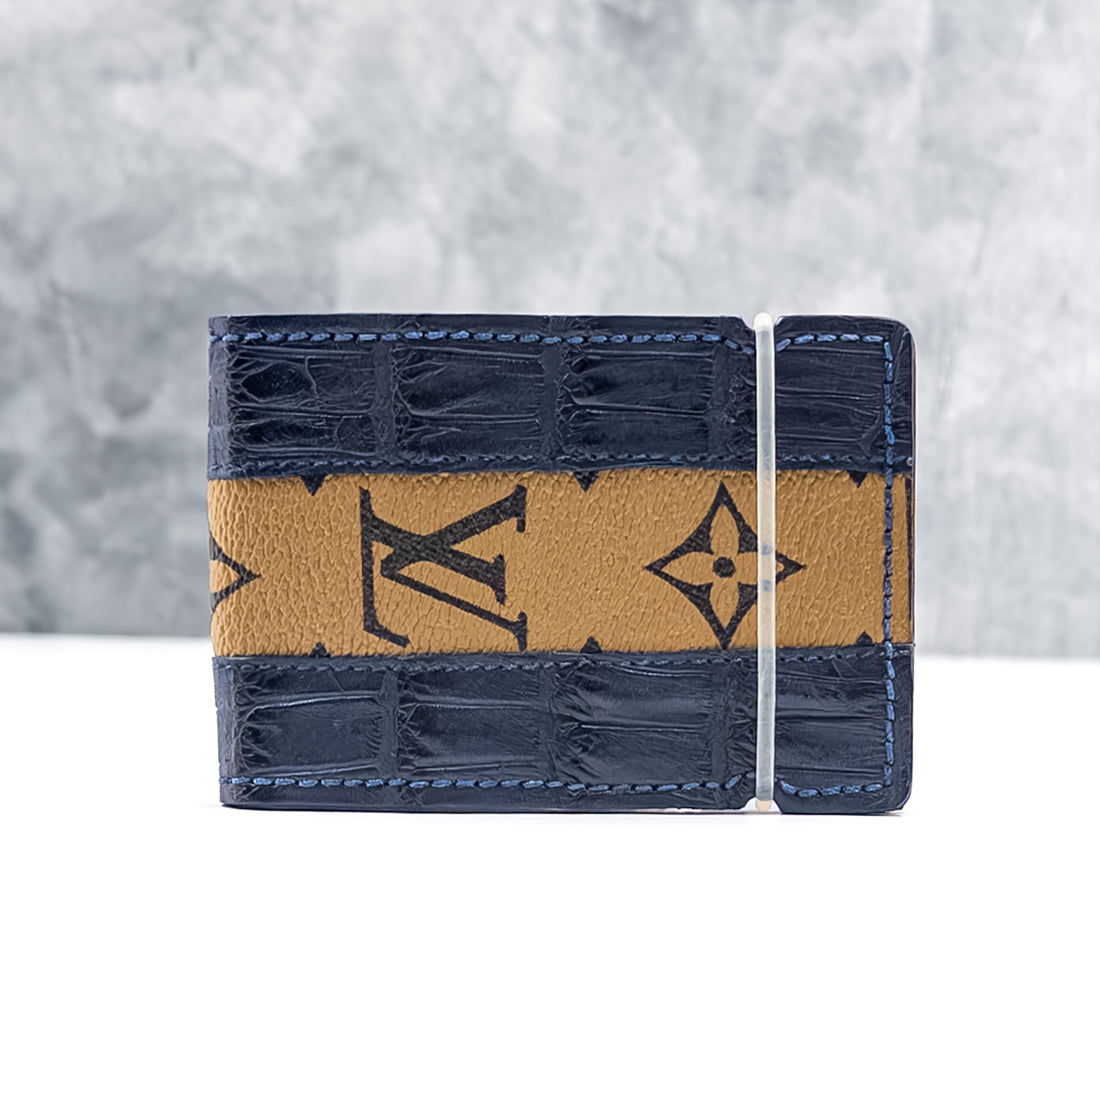 From Paris With Love Cash Cover: Tan Monogram And Navy Gator